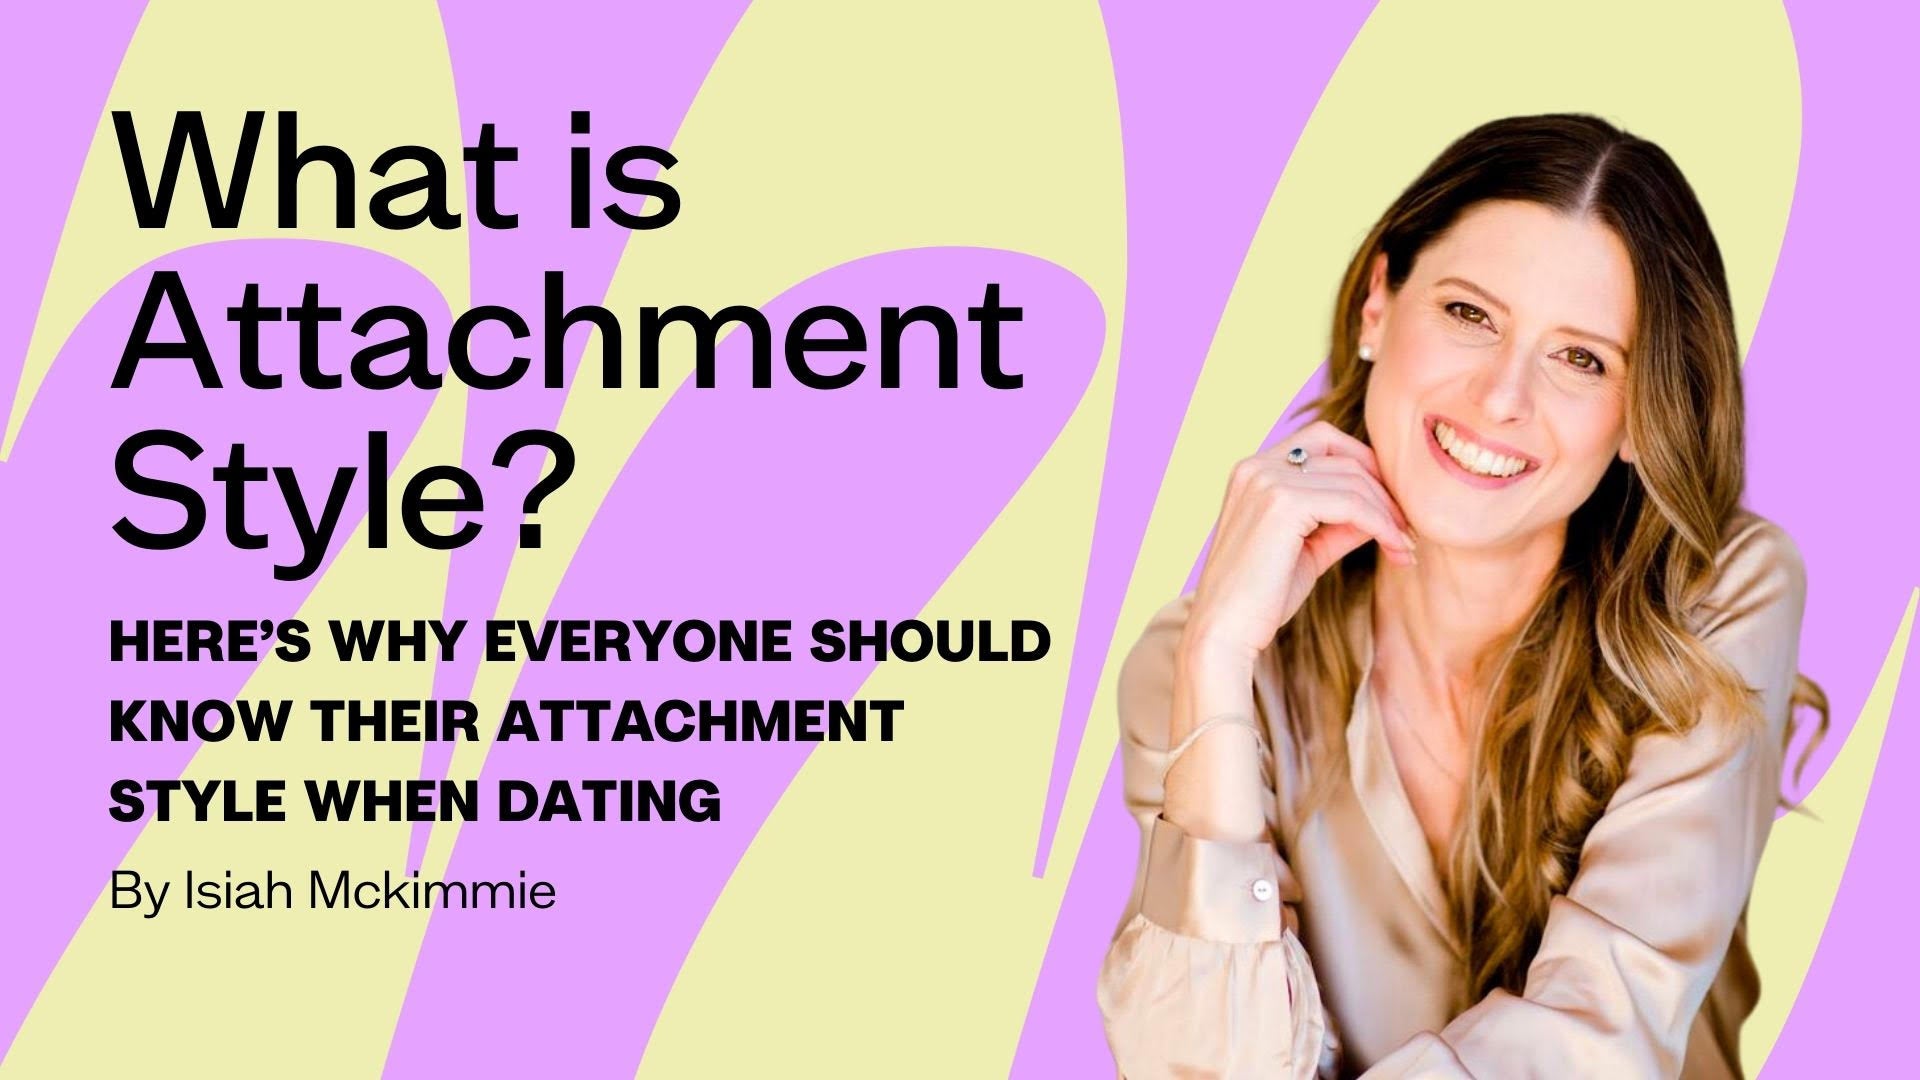 What is your Attachment Style? By Isiah McKimmie for Moments Condoms